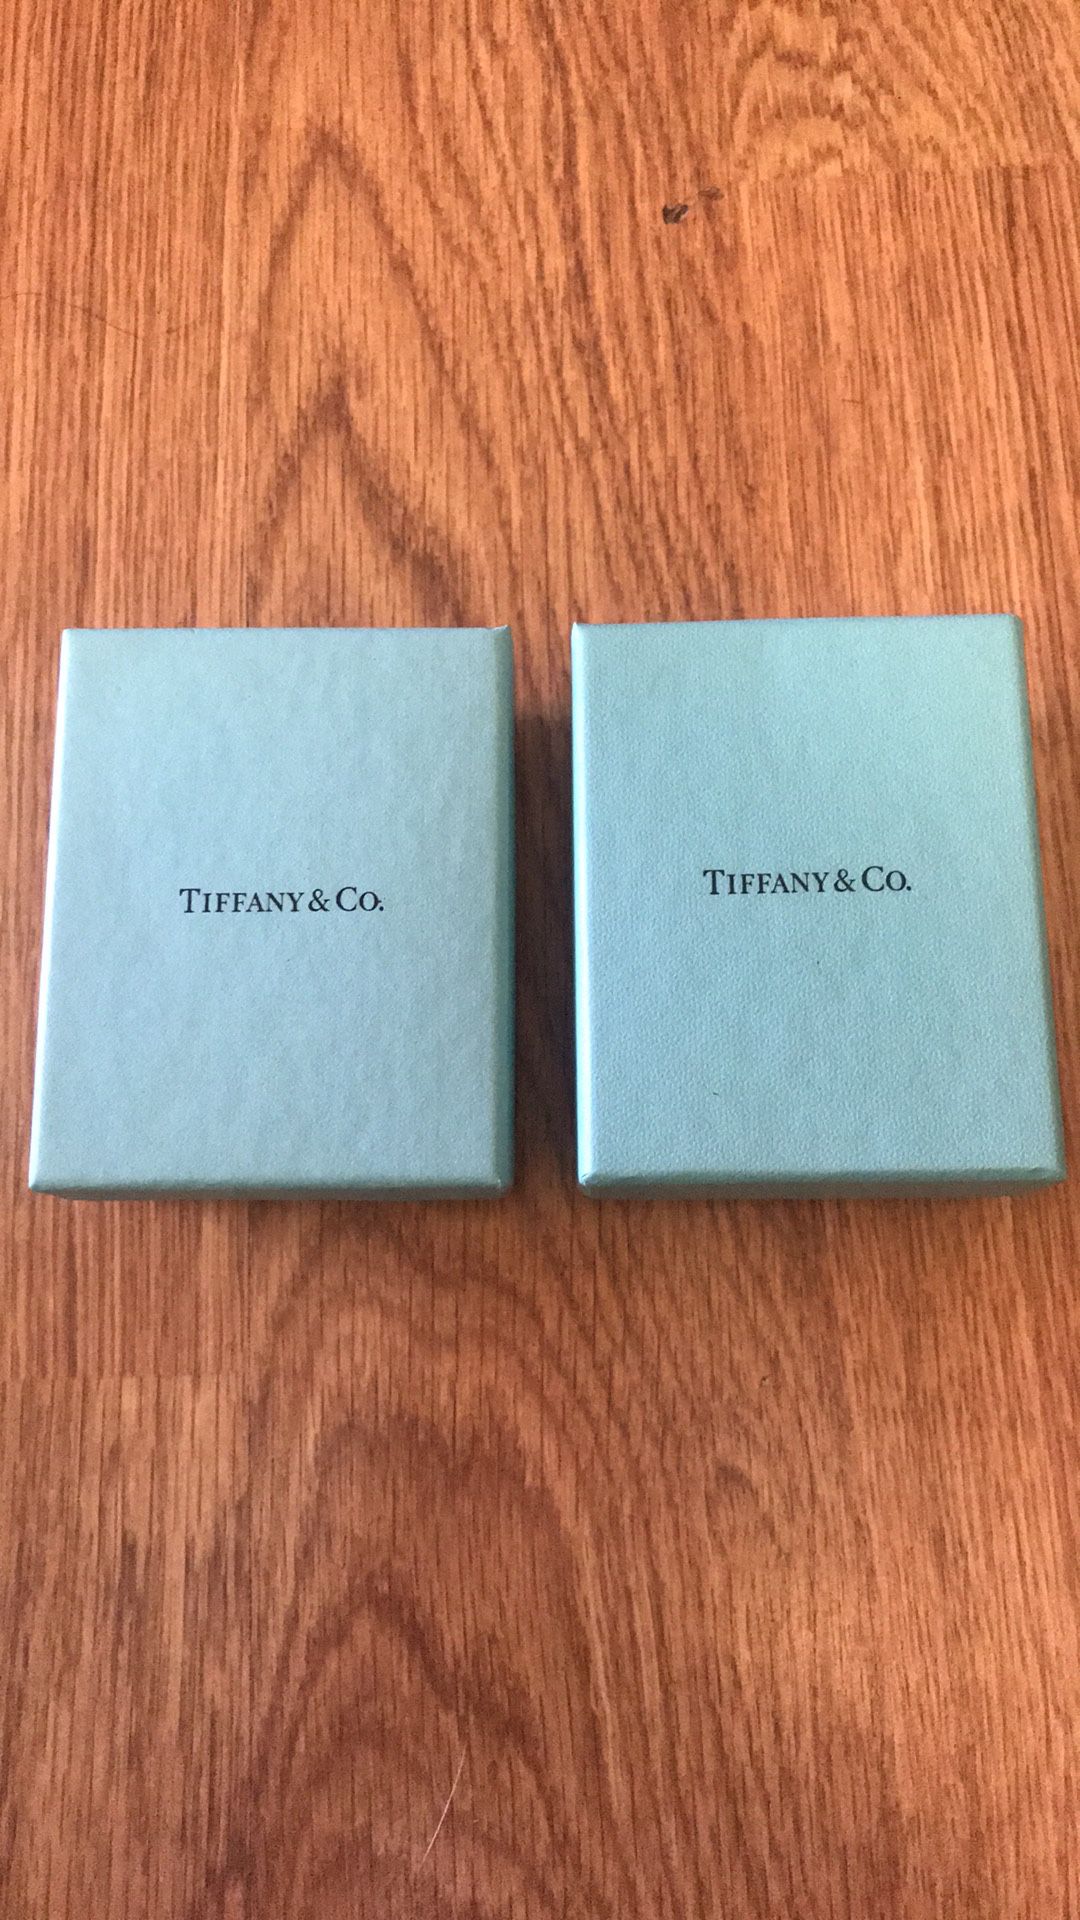 Tiffany &Co. Jewelry Boxes Only